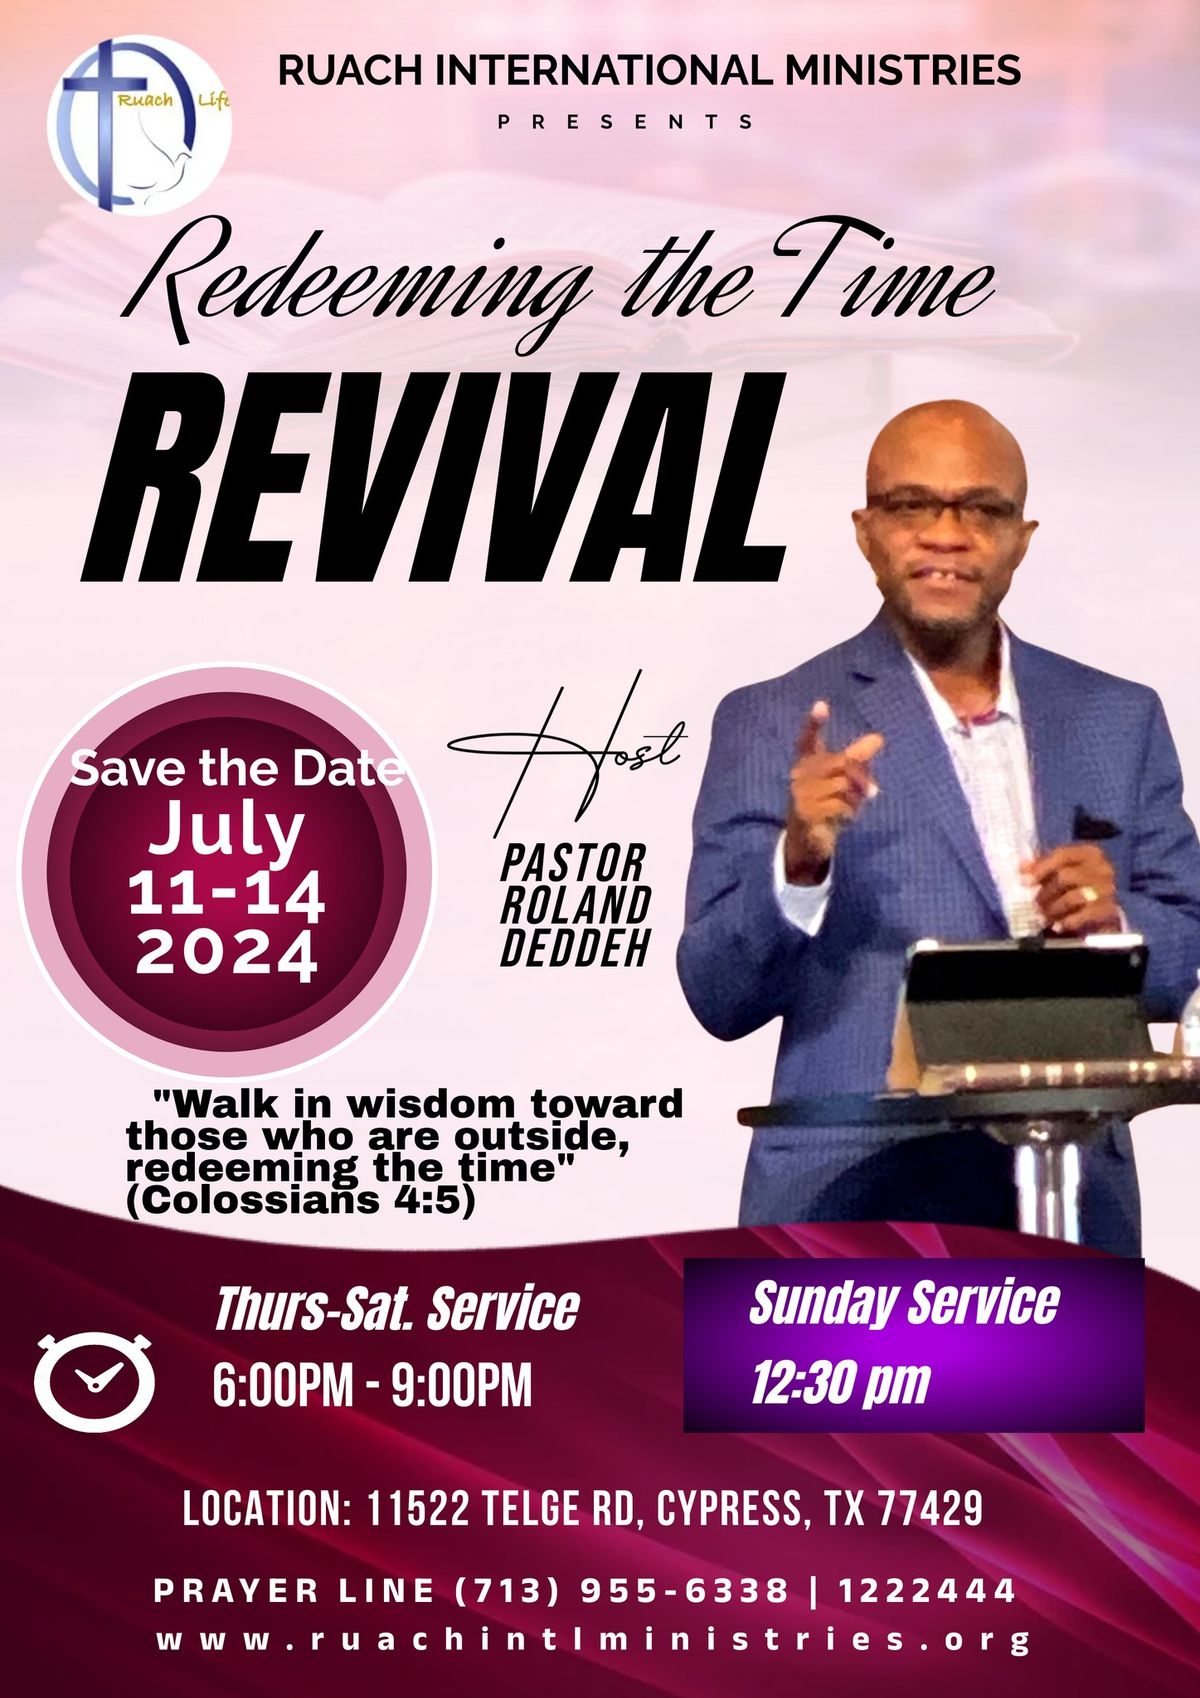 Revival: "Redeeming the Time" 